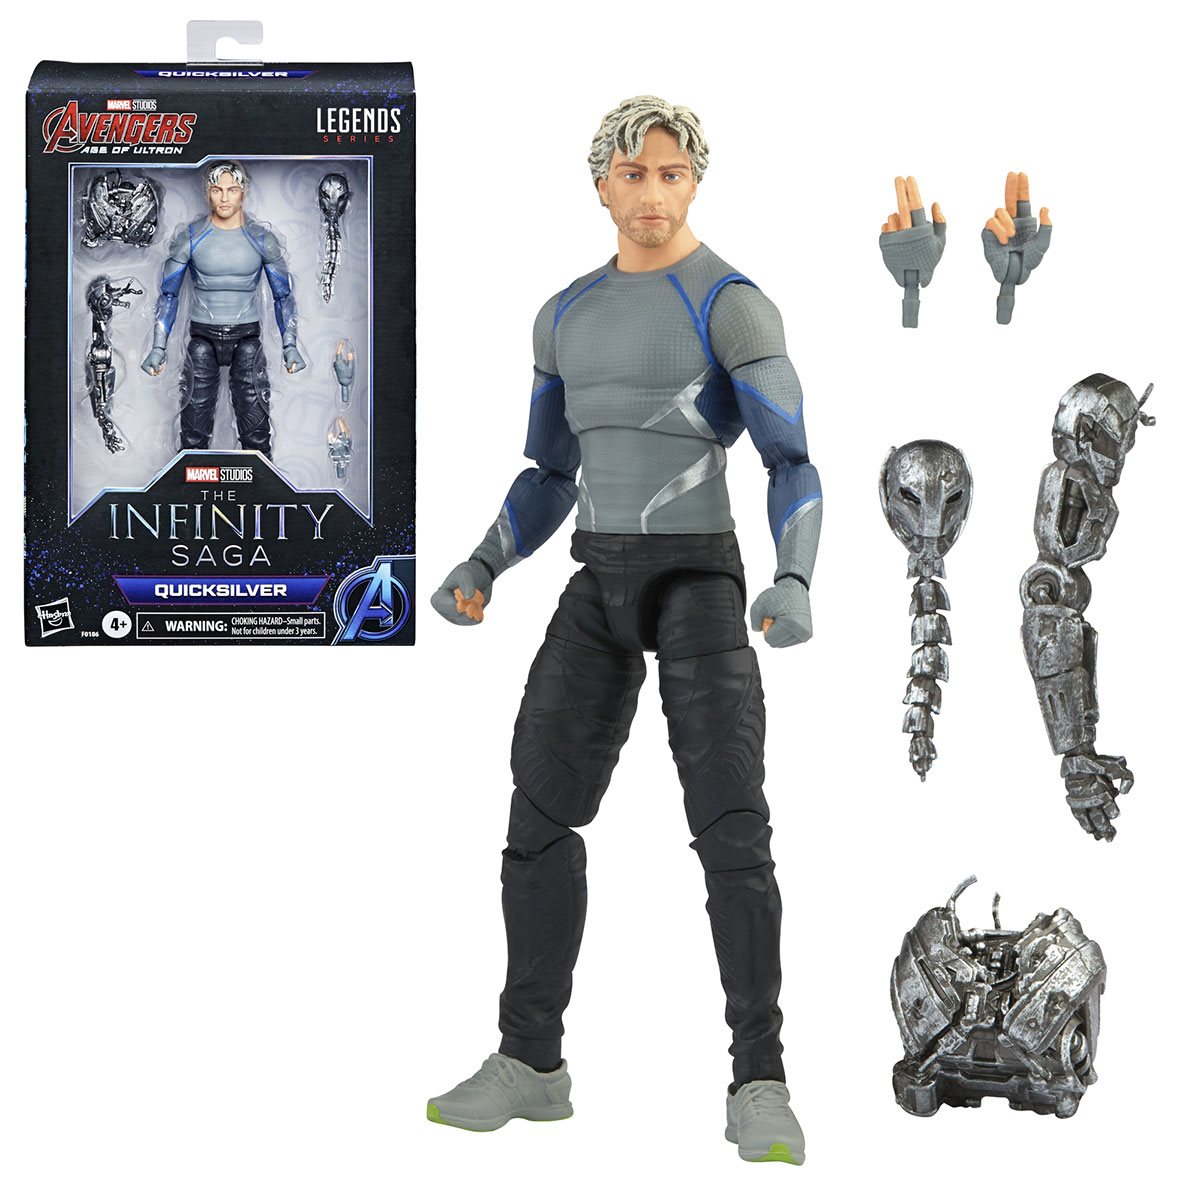 Quicksilver boxed and loose